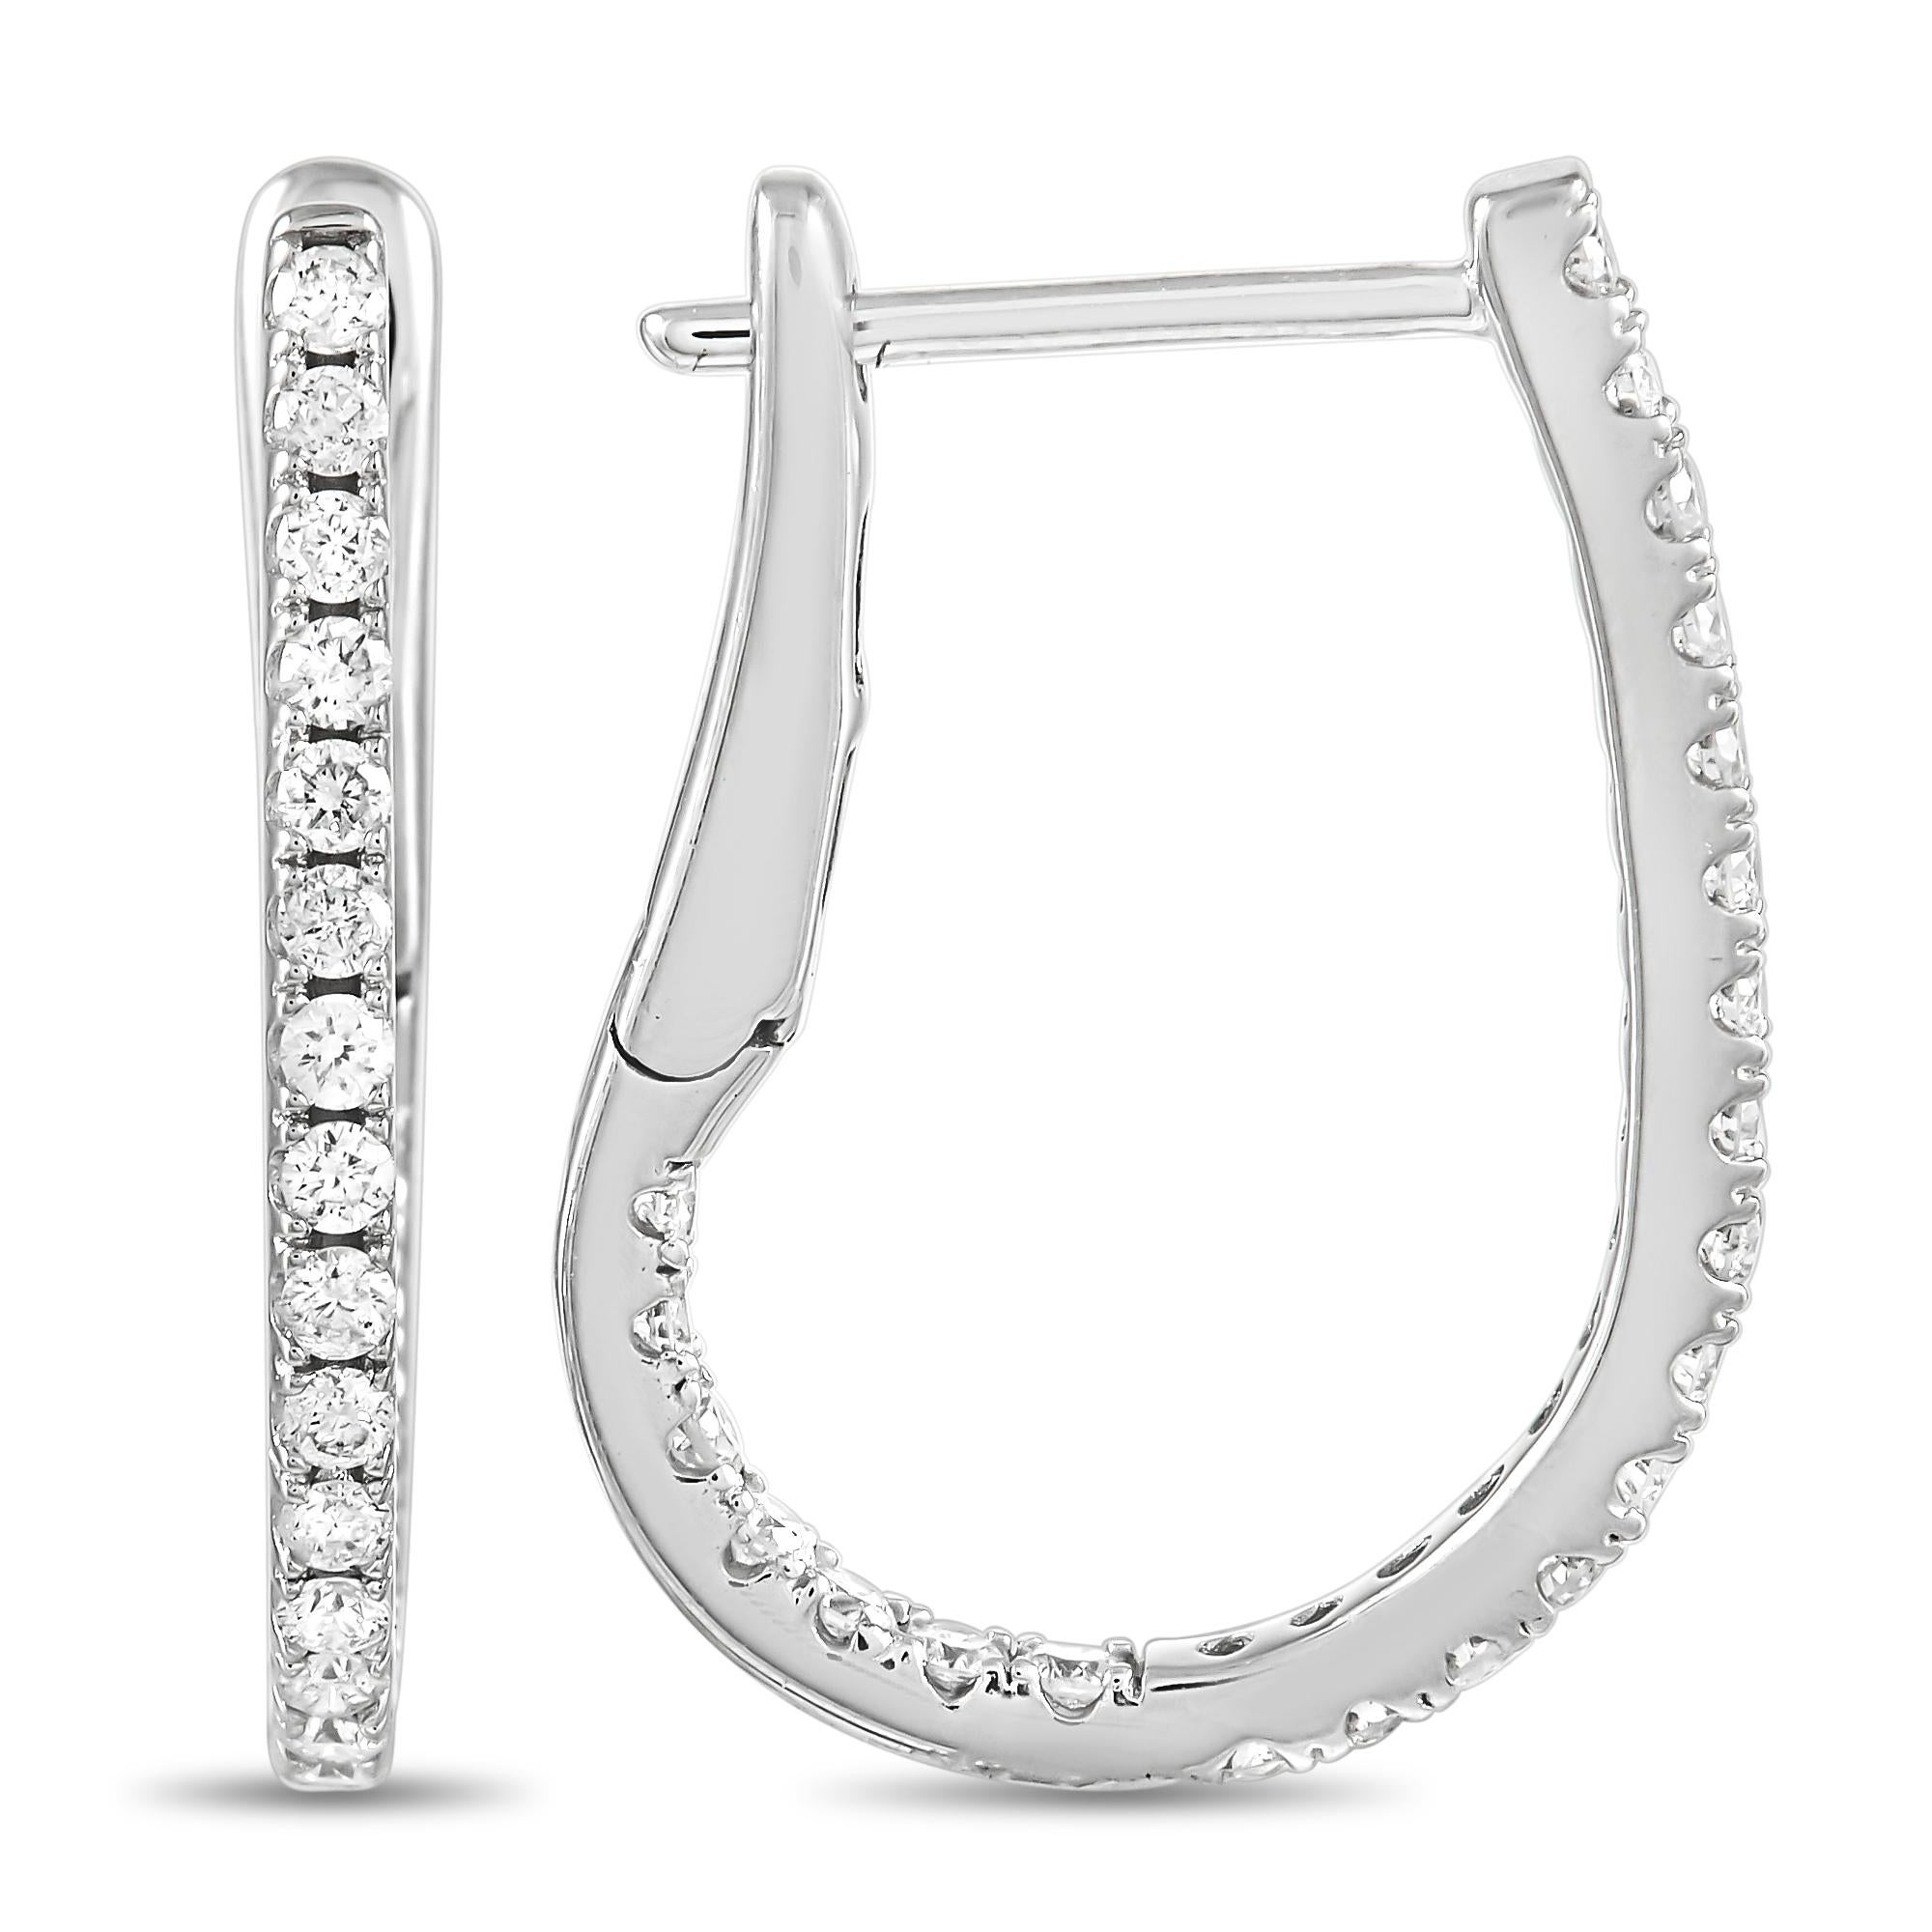 These sleek, sophisticated earrings will beautifully complement any ensemble. The understated 14K White Gold setting pairs perfectly with the stunning array of diamonds, which possess a total weight of 0.51 carats. Each earring measures 0.75” long